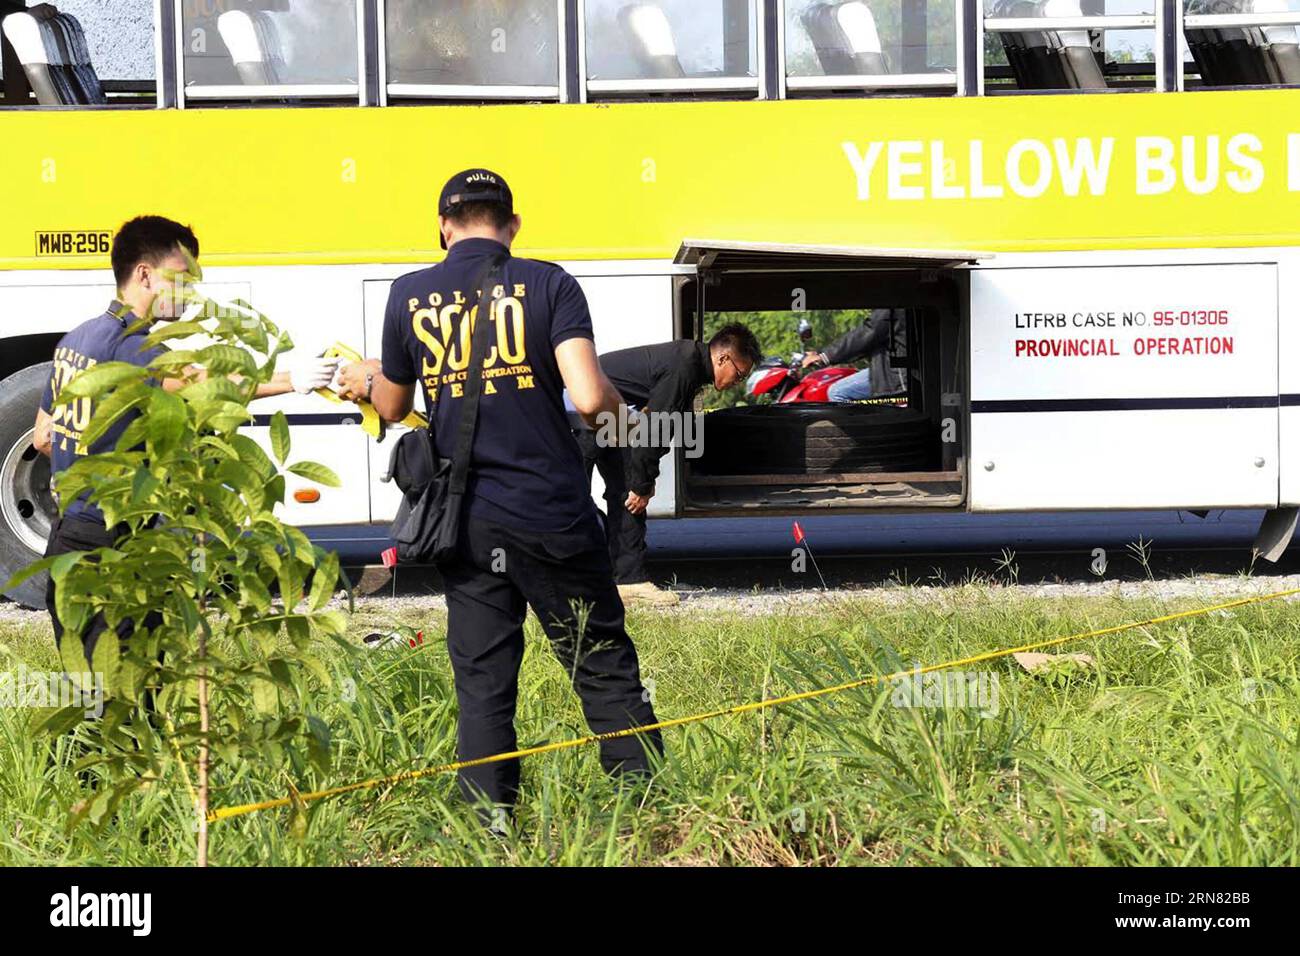 (151001) -- SOUTH COTABATO, Oct. 1, 2015 -- Officers of Philippine National Police inspect the passenger bus that blasted by an improvised explosive device (IED) in South Cotabato, Philippines, Oct. 1, 2015. 19 people were injured in the blast on Oct. 1. Investigators are still identifying the suspects responsible for the blast. ) PHILIPPINE-SOUTH COTABATO-BUS-EXPLOSION Stringer PUBLICATIONxNOTxINxCHN   South Cotabato OCT 1 2015 Officers of Philippine National Police inspect The Passenger Bus Thatcher Blasted by to Improvised Explosive Device IED in South Cotabato Philippines OCT 1 2015 19 Cel Stock Photo